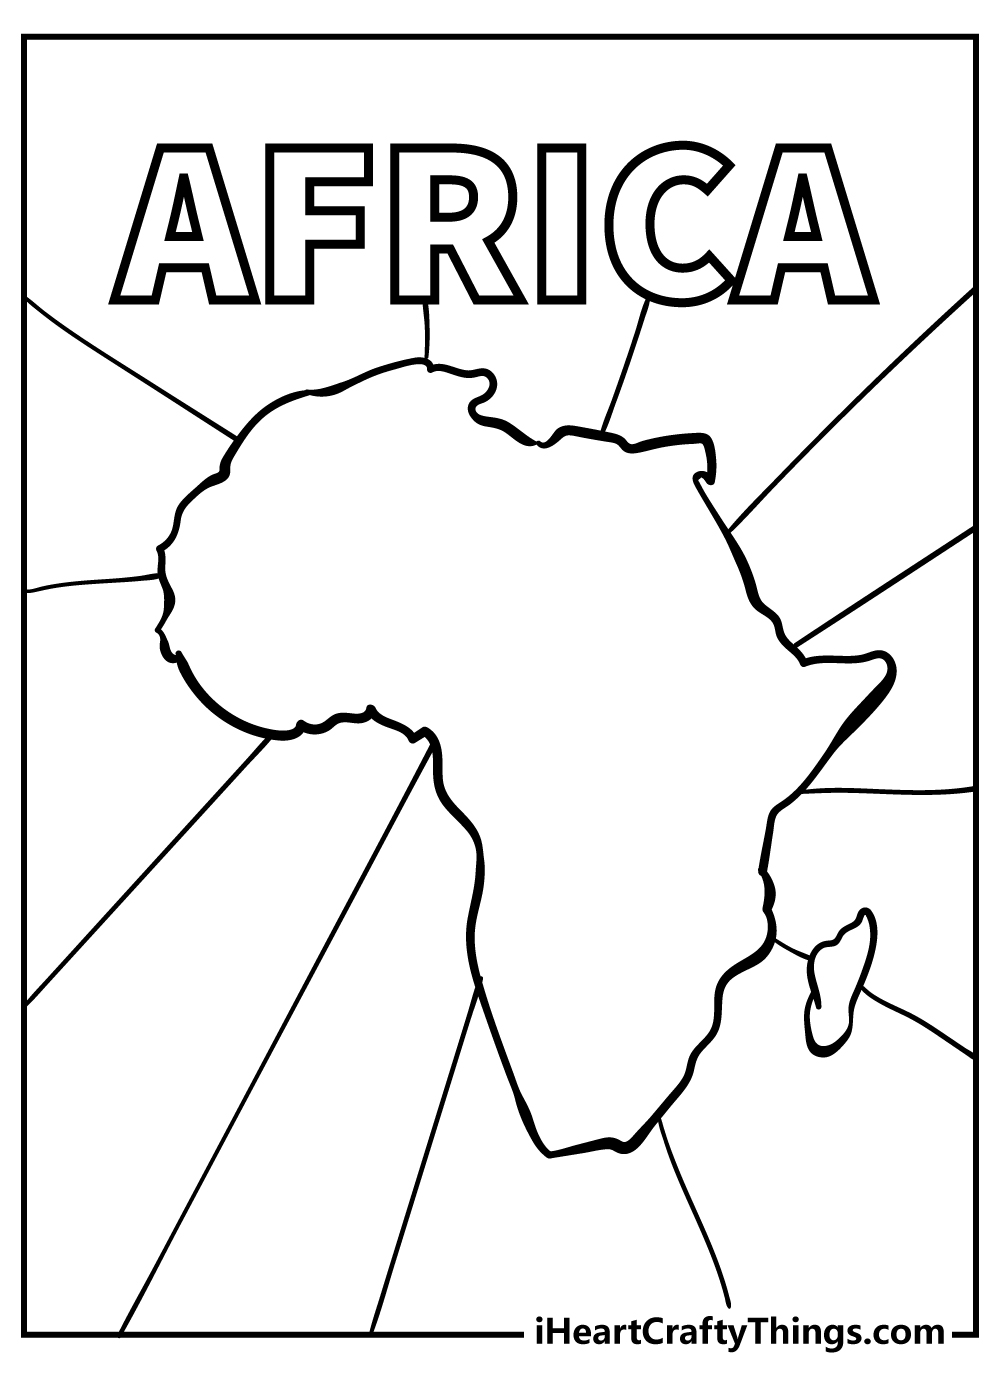 Africa Coloring Pages for kids free download